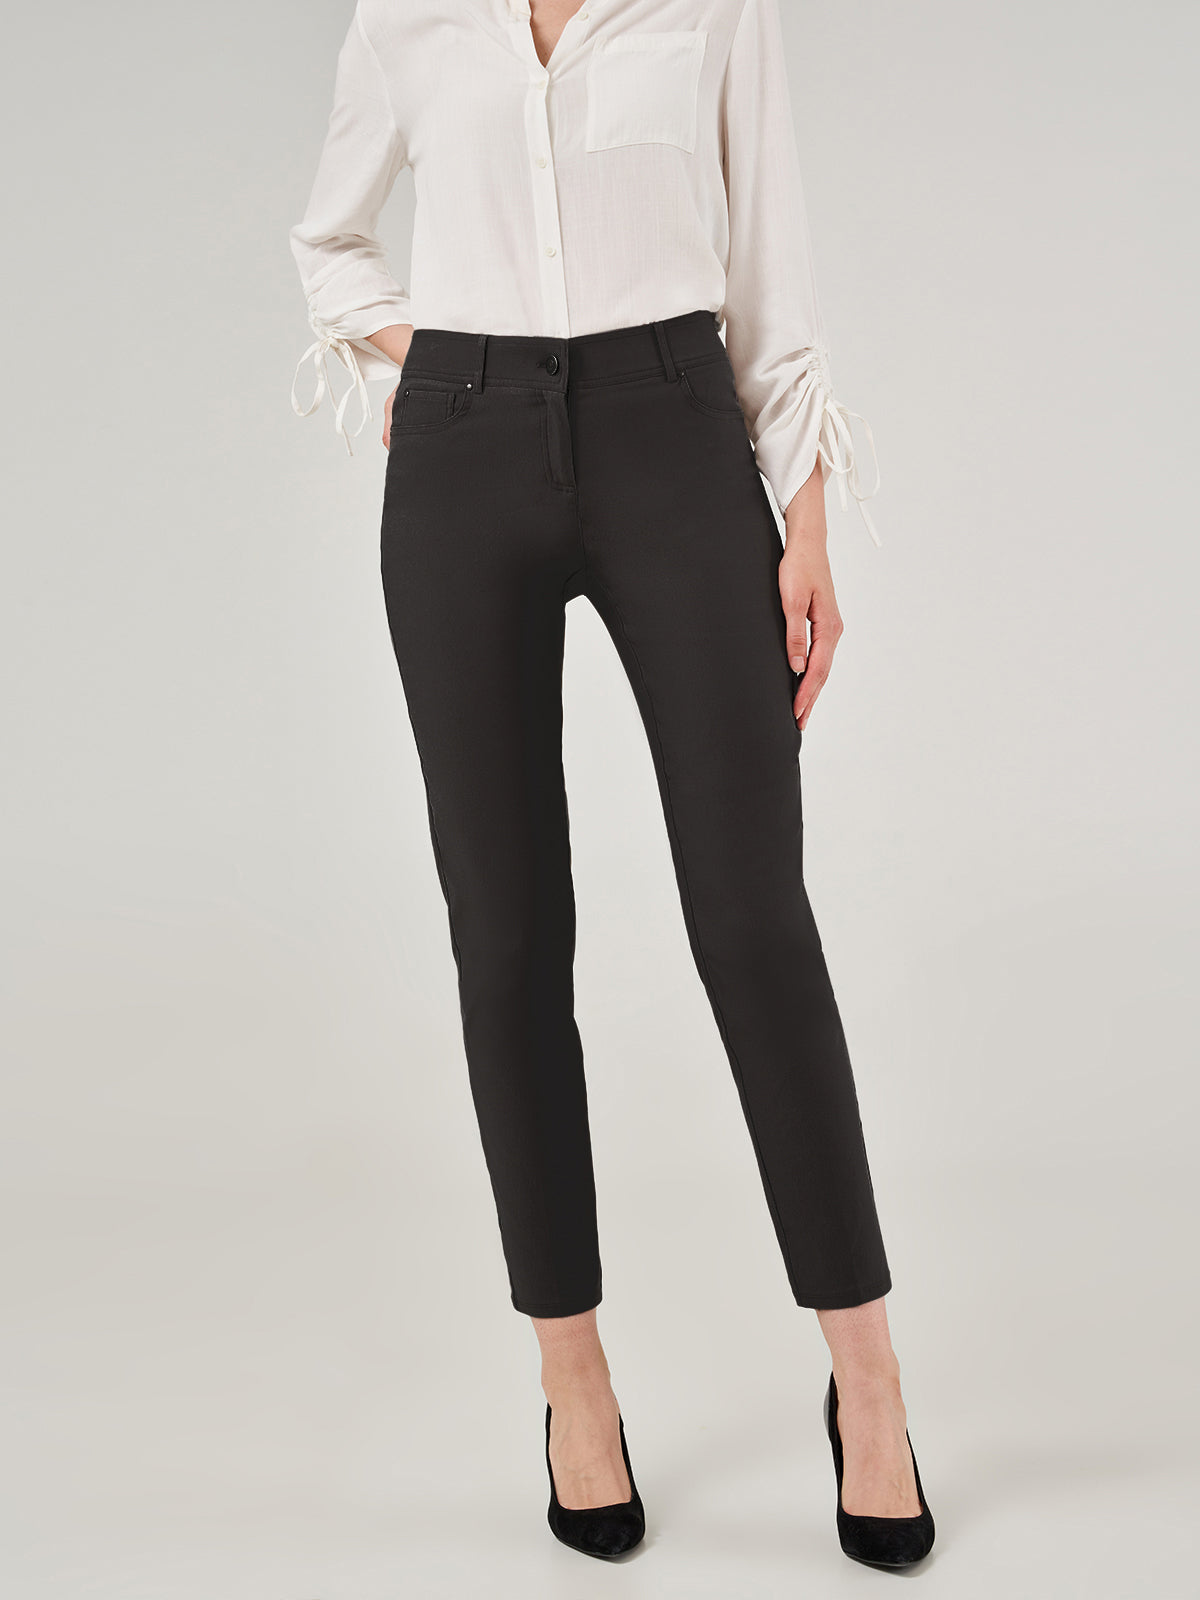 89th + Madison Luxe Millennium Five Pockets Stretch Pants